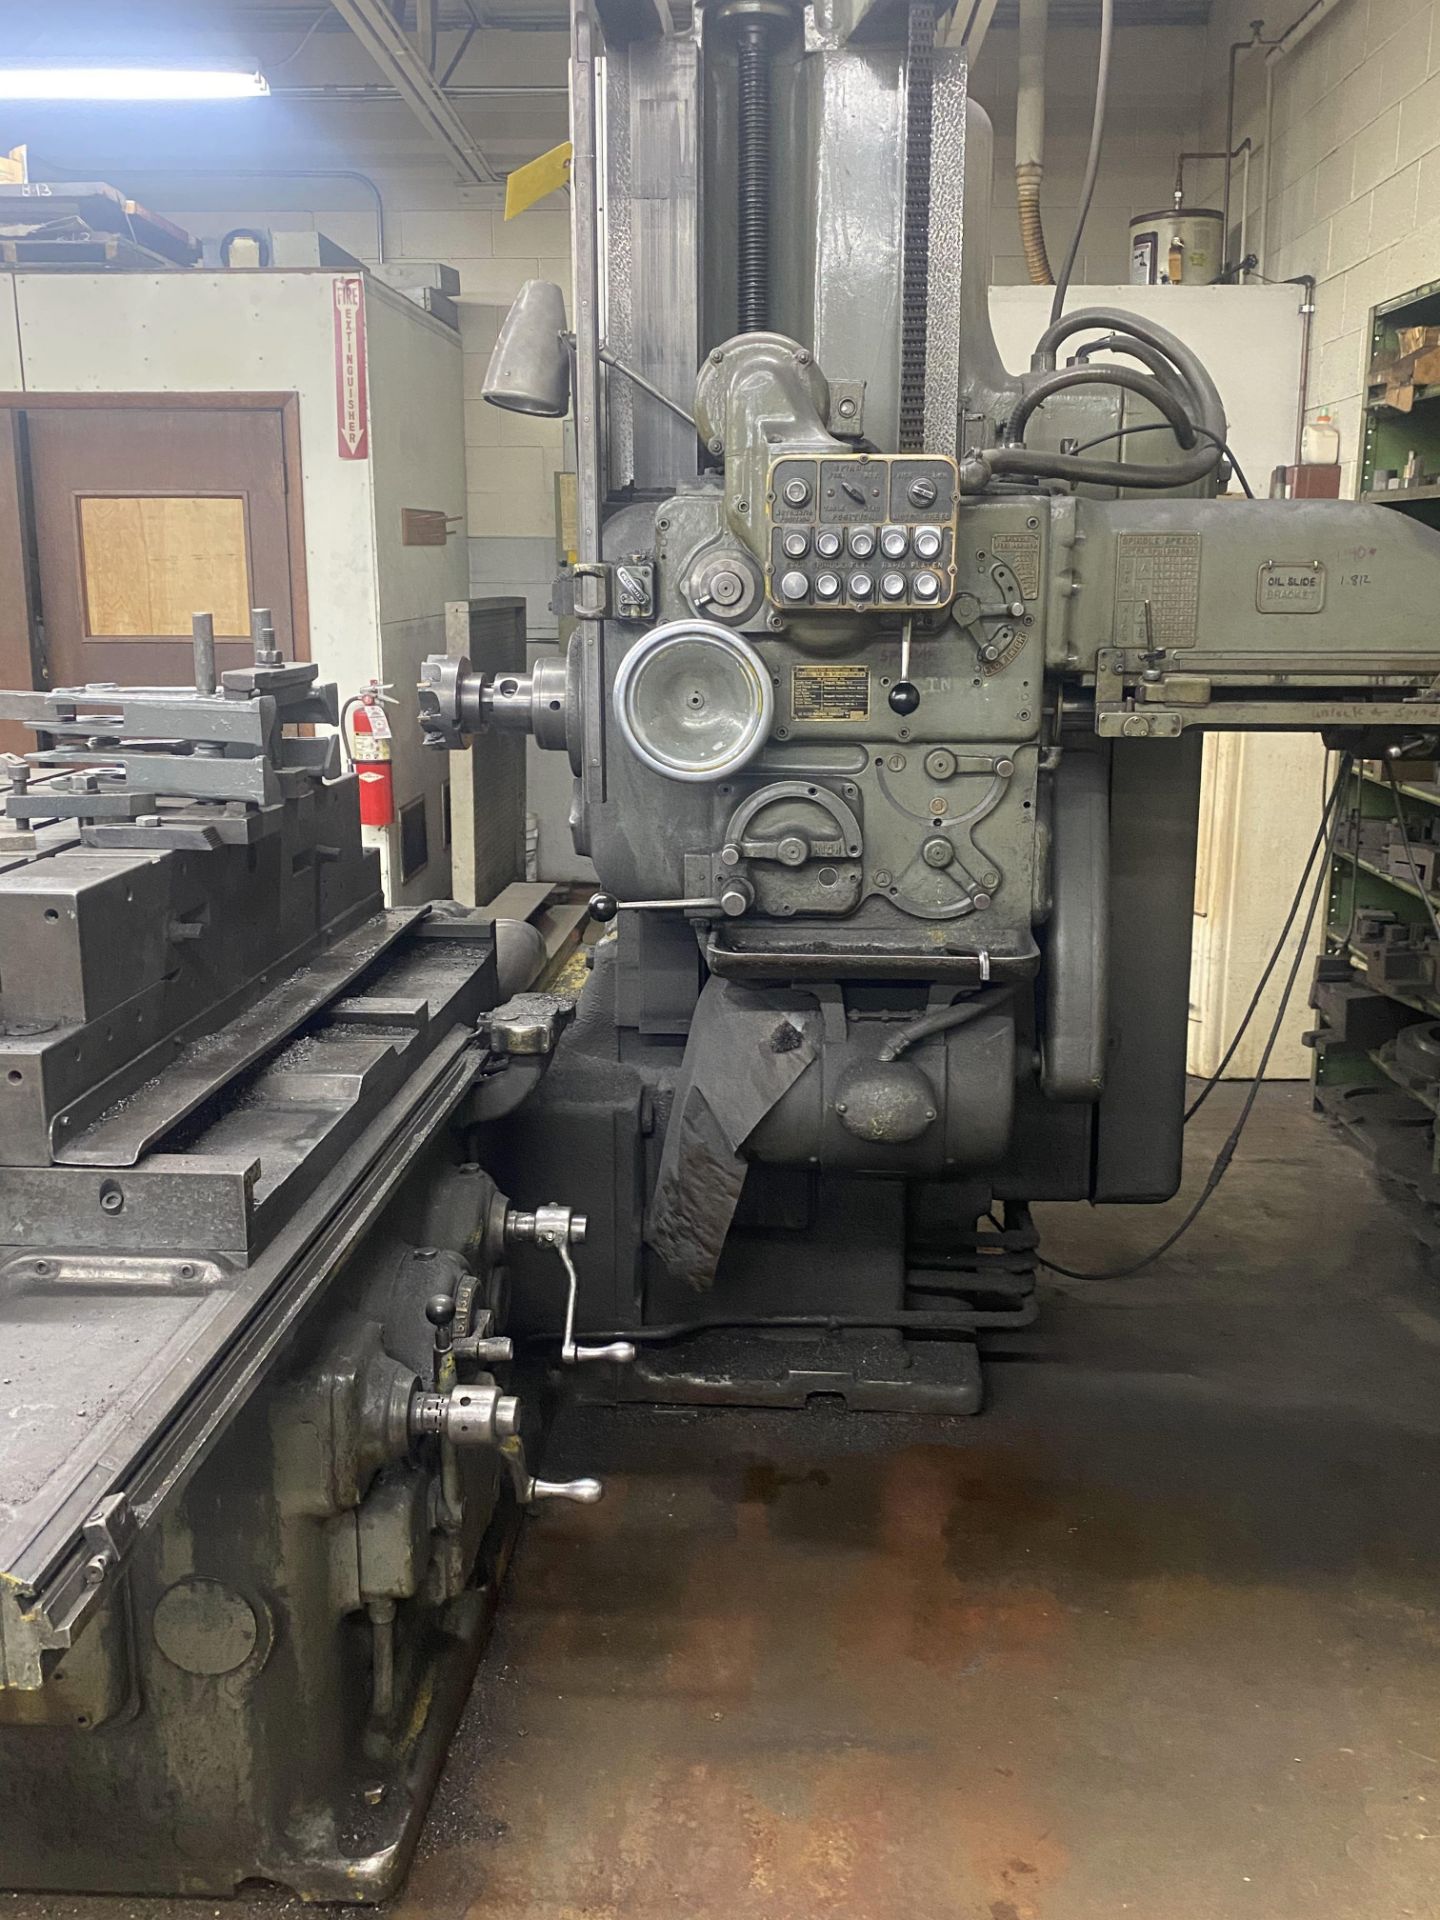 DEVLIEG 3" MODEL 3-B JIG MILL, S/N 22-165, 30" X 48" TABLE, 1200 RPM SPINDLE, 36" VERTICAL TRAVEL OF - Image 2 of 5